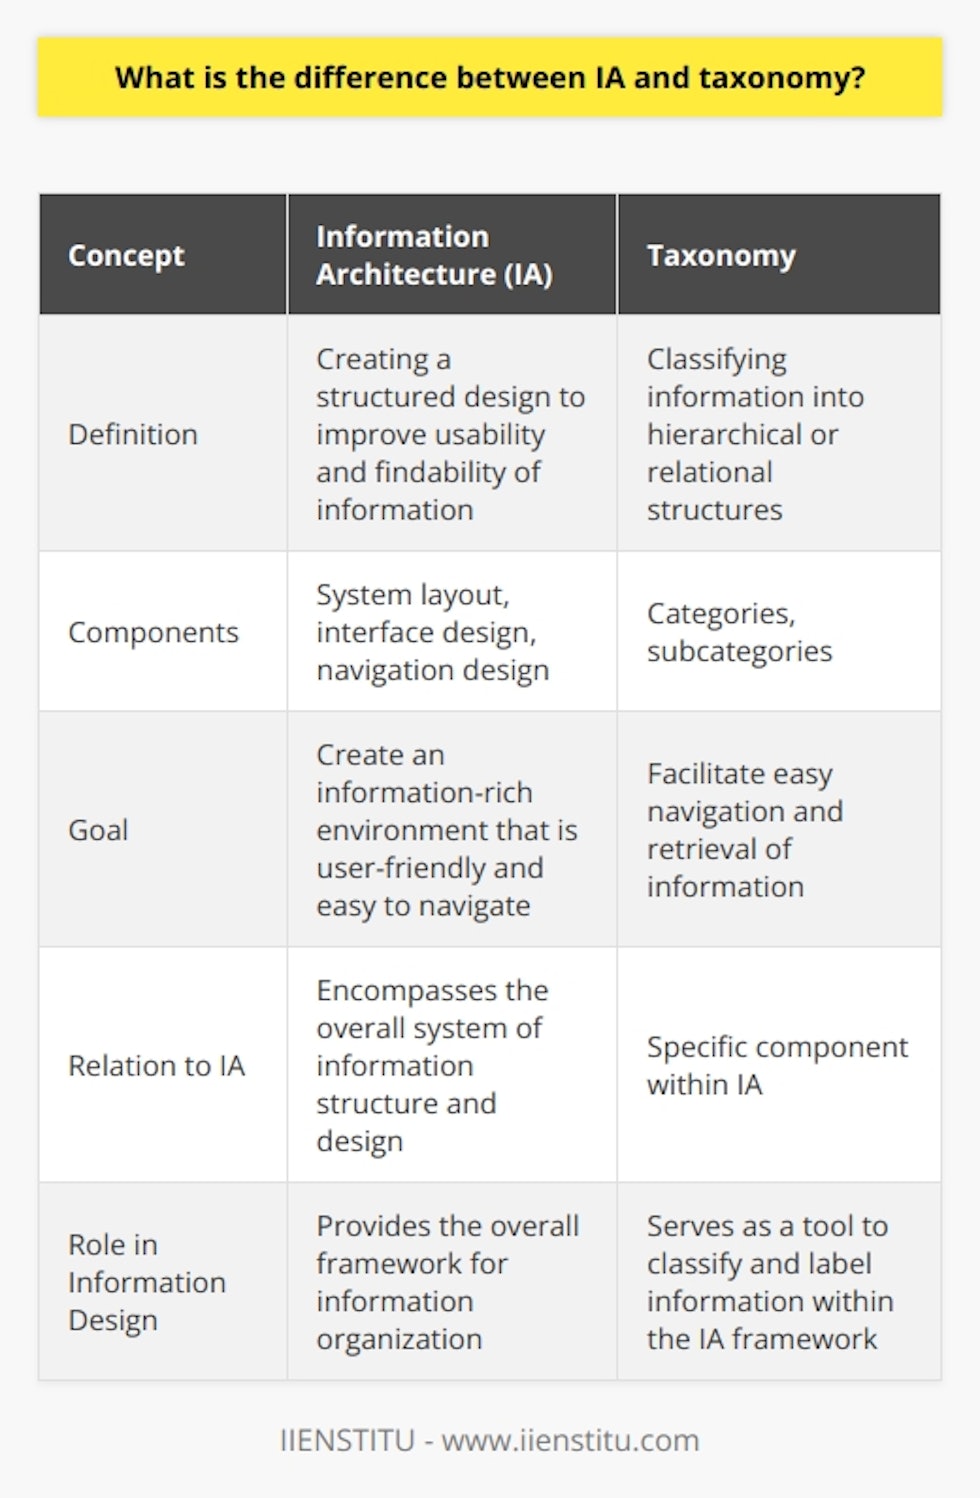 Information Architecture (IA) and taxonomy are both essential elements in the organization and design of information. IA involves creating a structured design to improve usability and findability, while taxonomy focuses on classifying information into hierarchical or relational structures.IA encompasses the entire system of information structure and design, including system layout, interface design, and navigation design. It aims to create an information-rich environment that is user-friendly and easy to navigate. By organizing and labeling information effectively, IA ensures that users can easily find the information they are looking for.Taxonomy, on the other hand, is a specific component within IA that focuses solely on the classification of information. It involves organizing information into categories and subcategories, creating a logical structure that facilitates easy navigation and retrieval of information. By using taxonomy, information can be classified in a way that makes sense to users, enhancing the overall findability of the information.While IA and taxonomy are distinct concepts, they are closely interrelated and often used together in information design. IA provides the overall framework for information organization, while taxonomy serves as a tool to classify and label the information within that framework. The combination of IA and taxonomy creates an effective information design that is user-friendly, easily navigable, and enhances the overall user experience.In conclusion, IA and taxonomy play vital roles in the design and management of information. They work together to create a well-structured and easily accessible digital interface. By understanding the differences and interdependencies between IA and taxonomy, information professionals can effectively organize and present information, improving usability and findability for users.